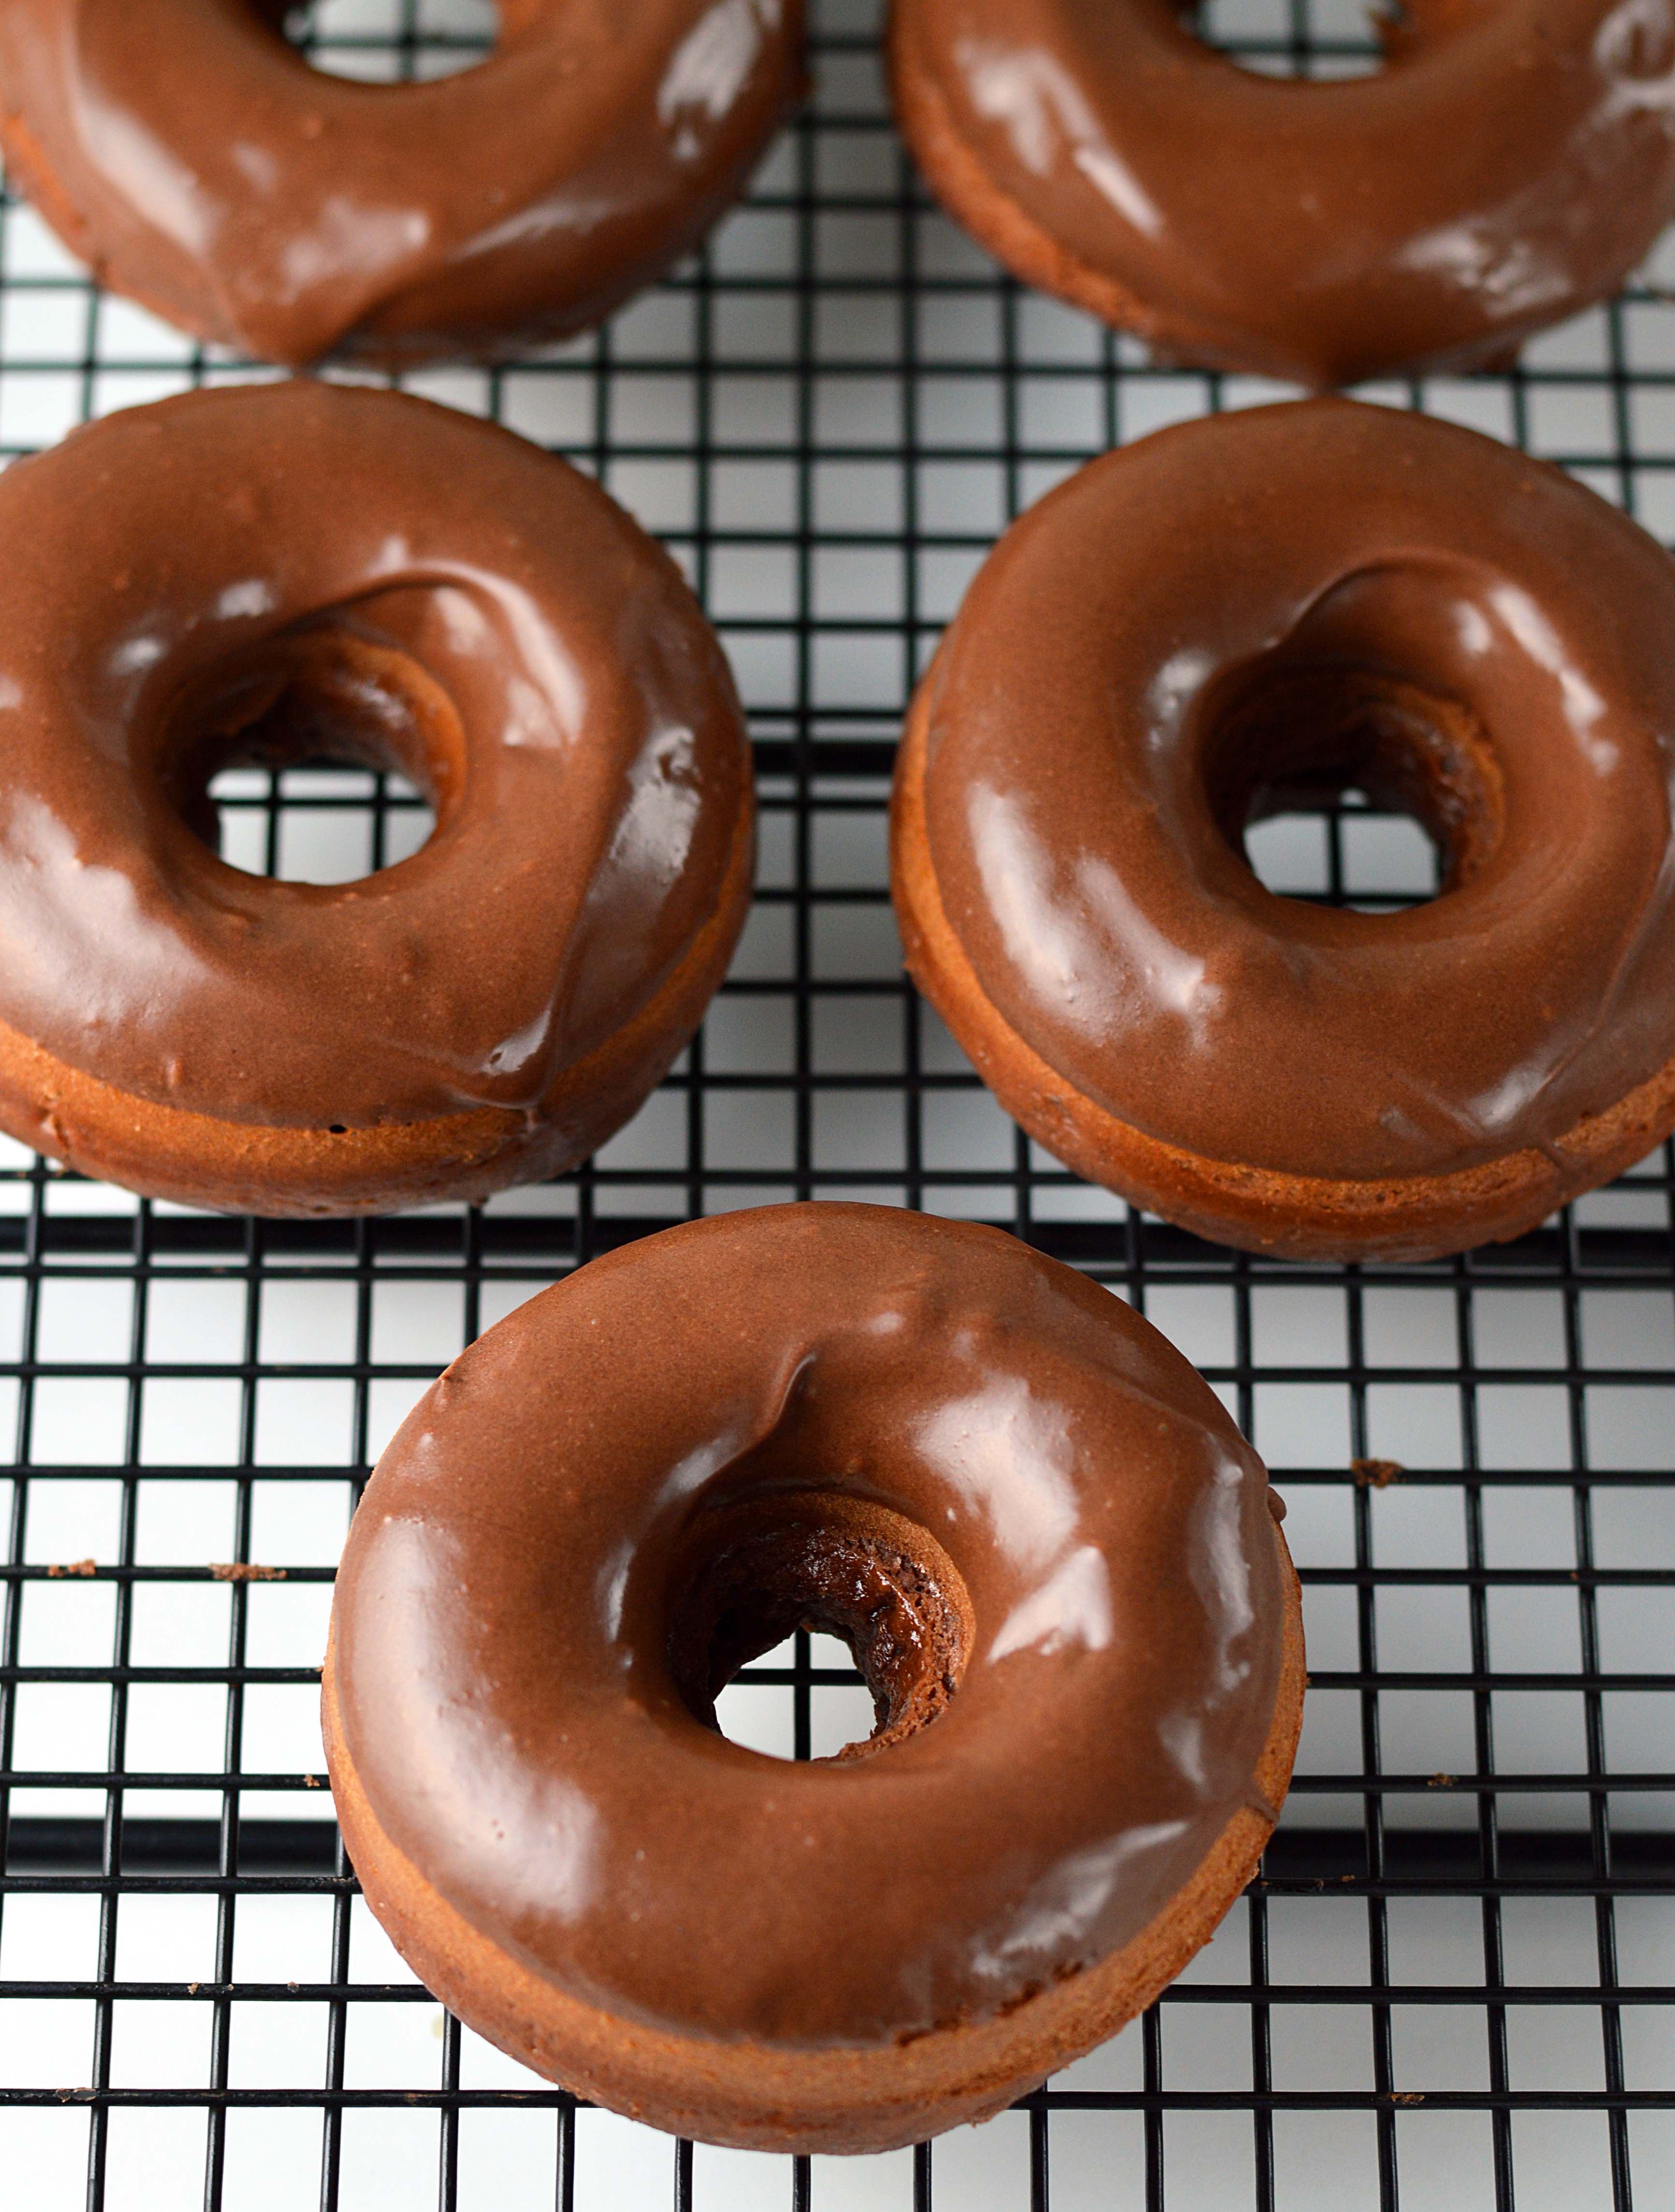 Baked chocolate doughnuts - Friday is Cake Night